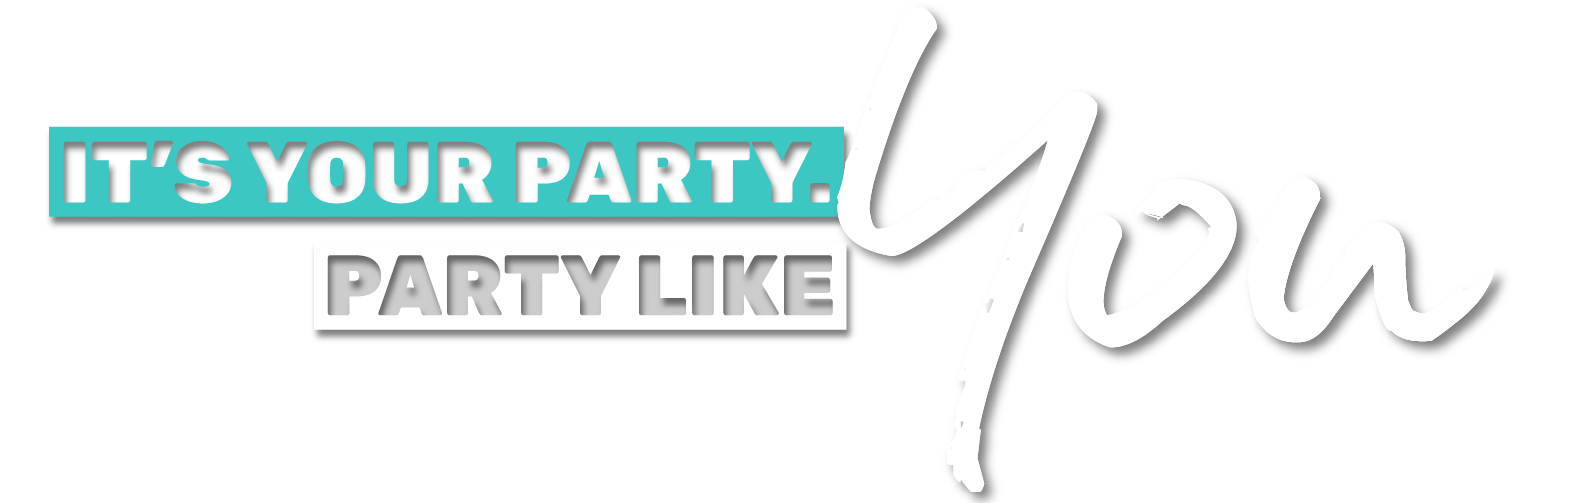 Party with Complete Kitchener, Ontario